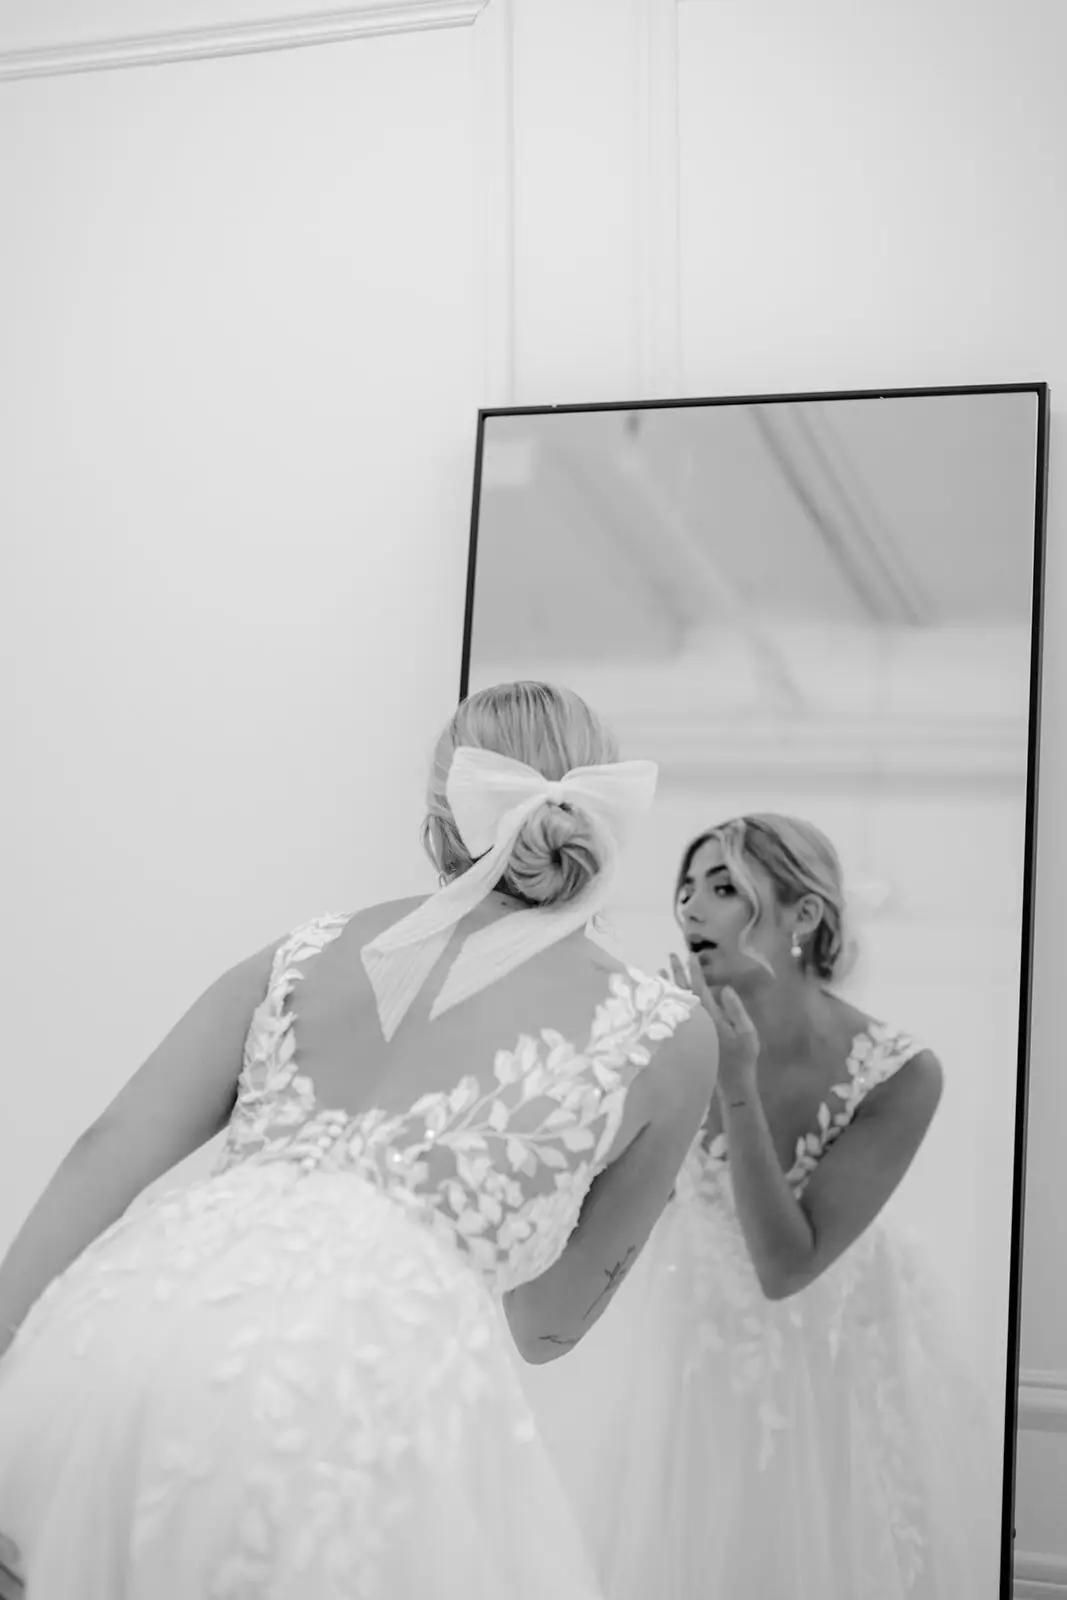 A Stylist’s Guide to Wedding Dress Shopping Image